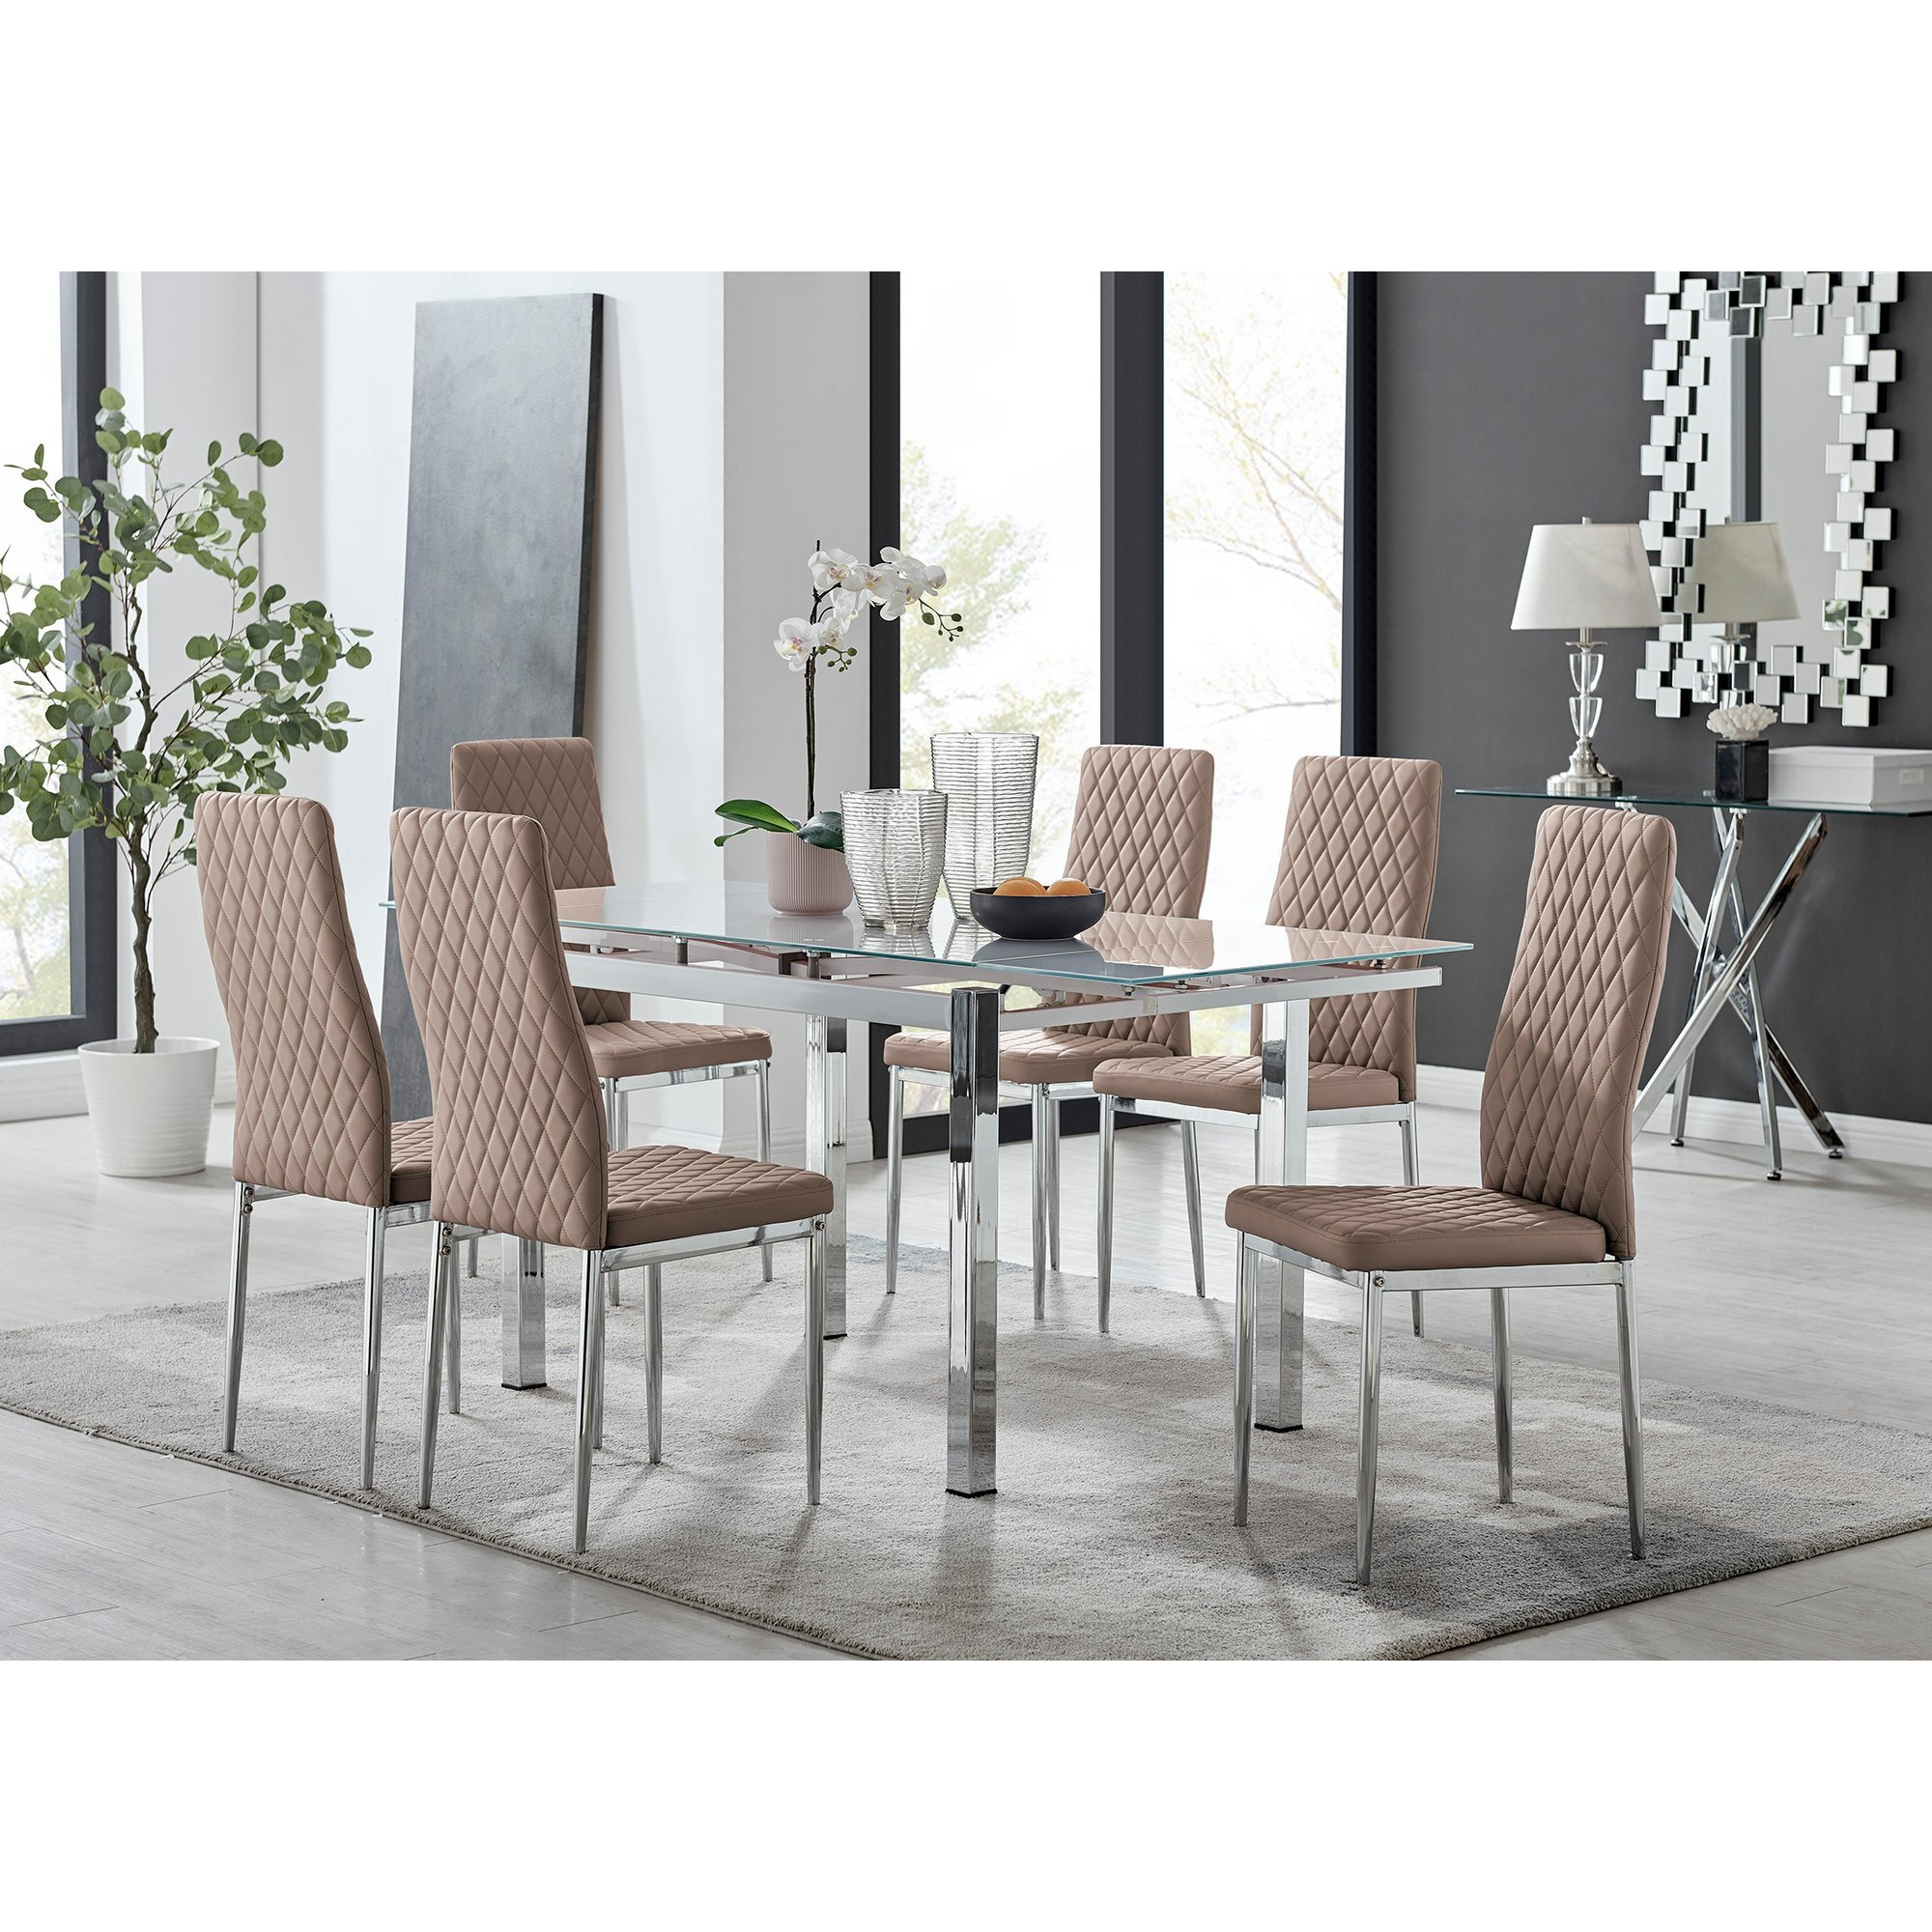 Enna White Glass Extending Dining Table and 6 Milan Chairs